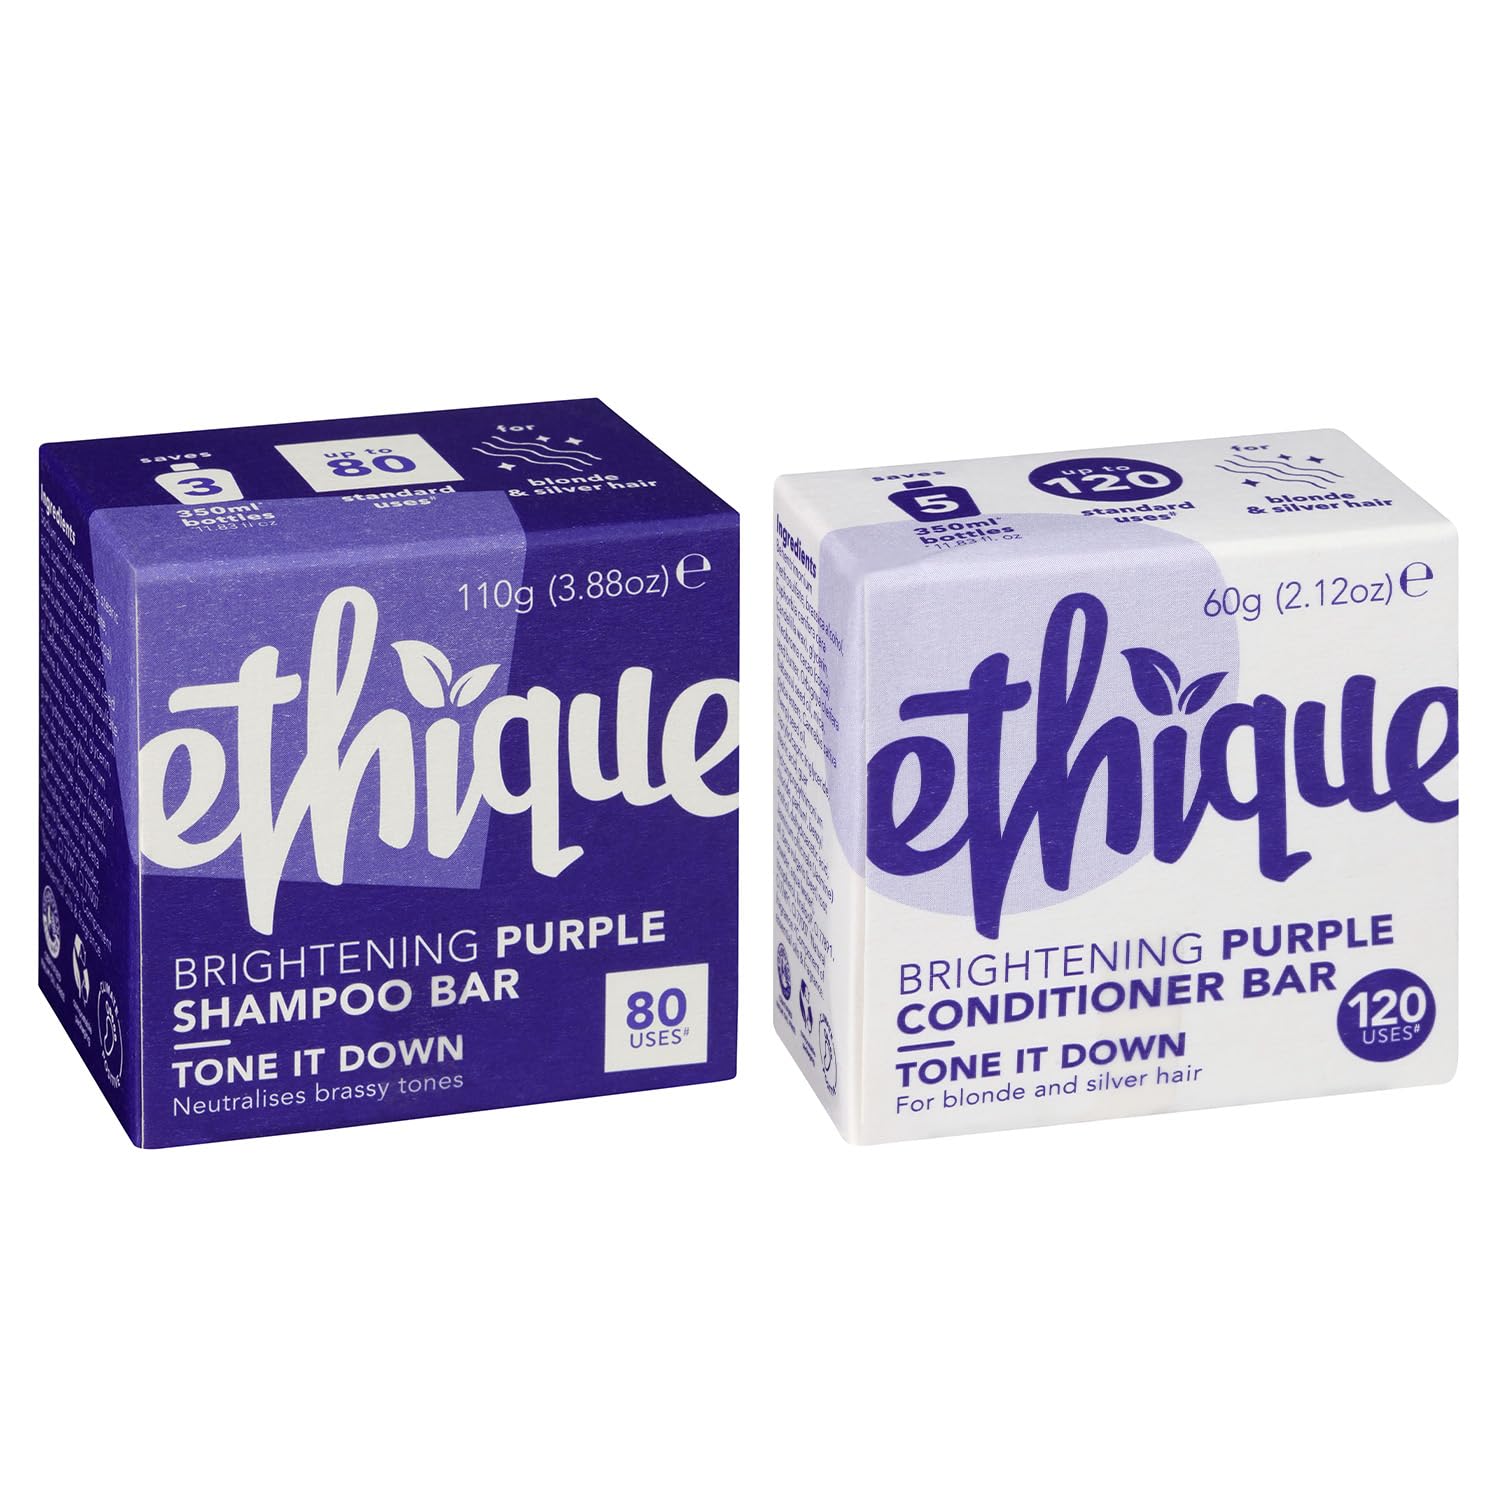 Ethique Tone it Down Giftpack - Purple Shampoo for Blonde Hair and Gray Hair & Conditioner Bar Set - Vegan, Eco-Friendly, Plastic-Free, Cruelty-Free 6 oz (Set of 2)